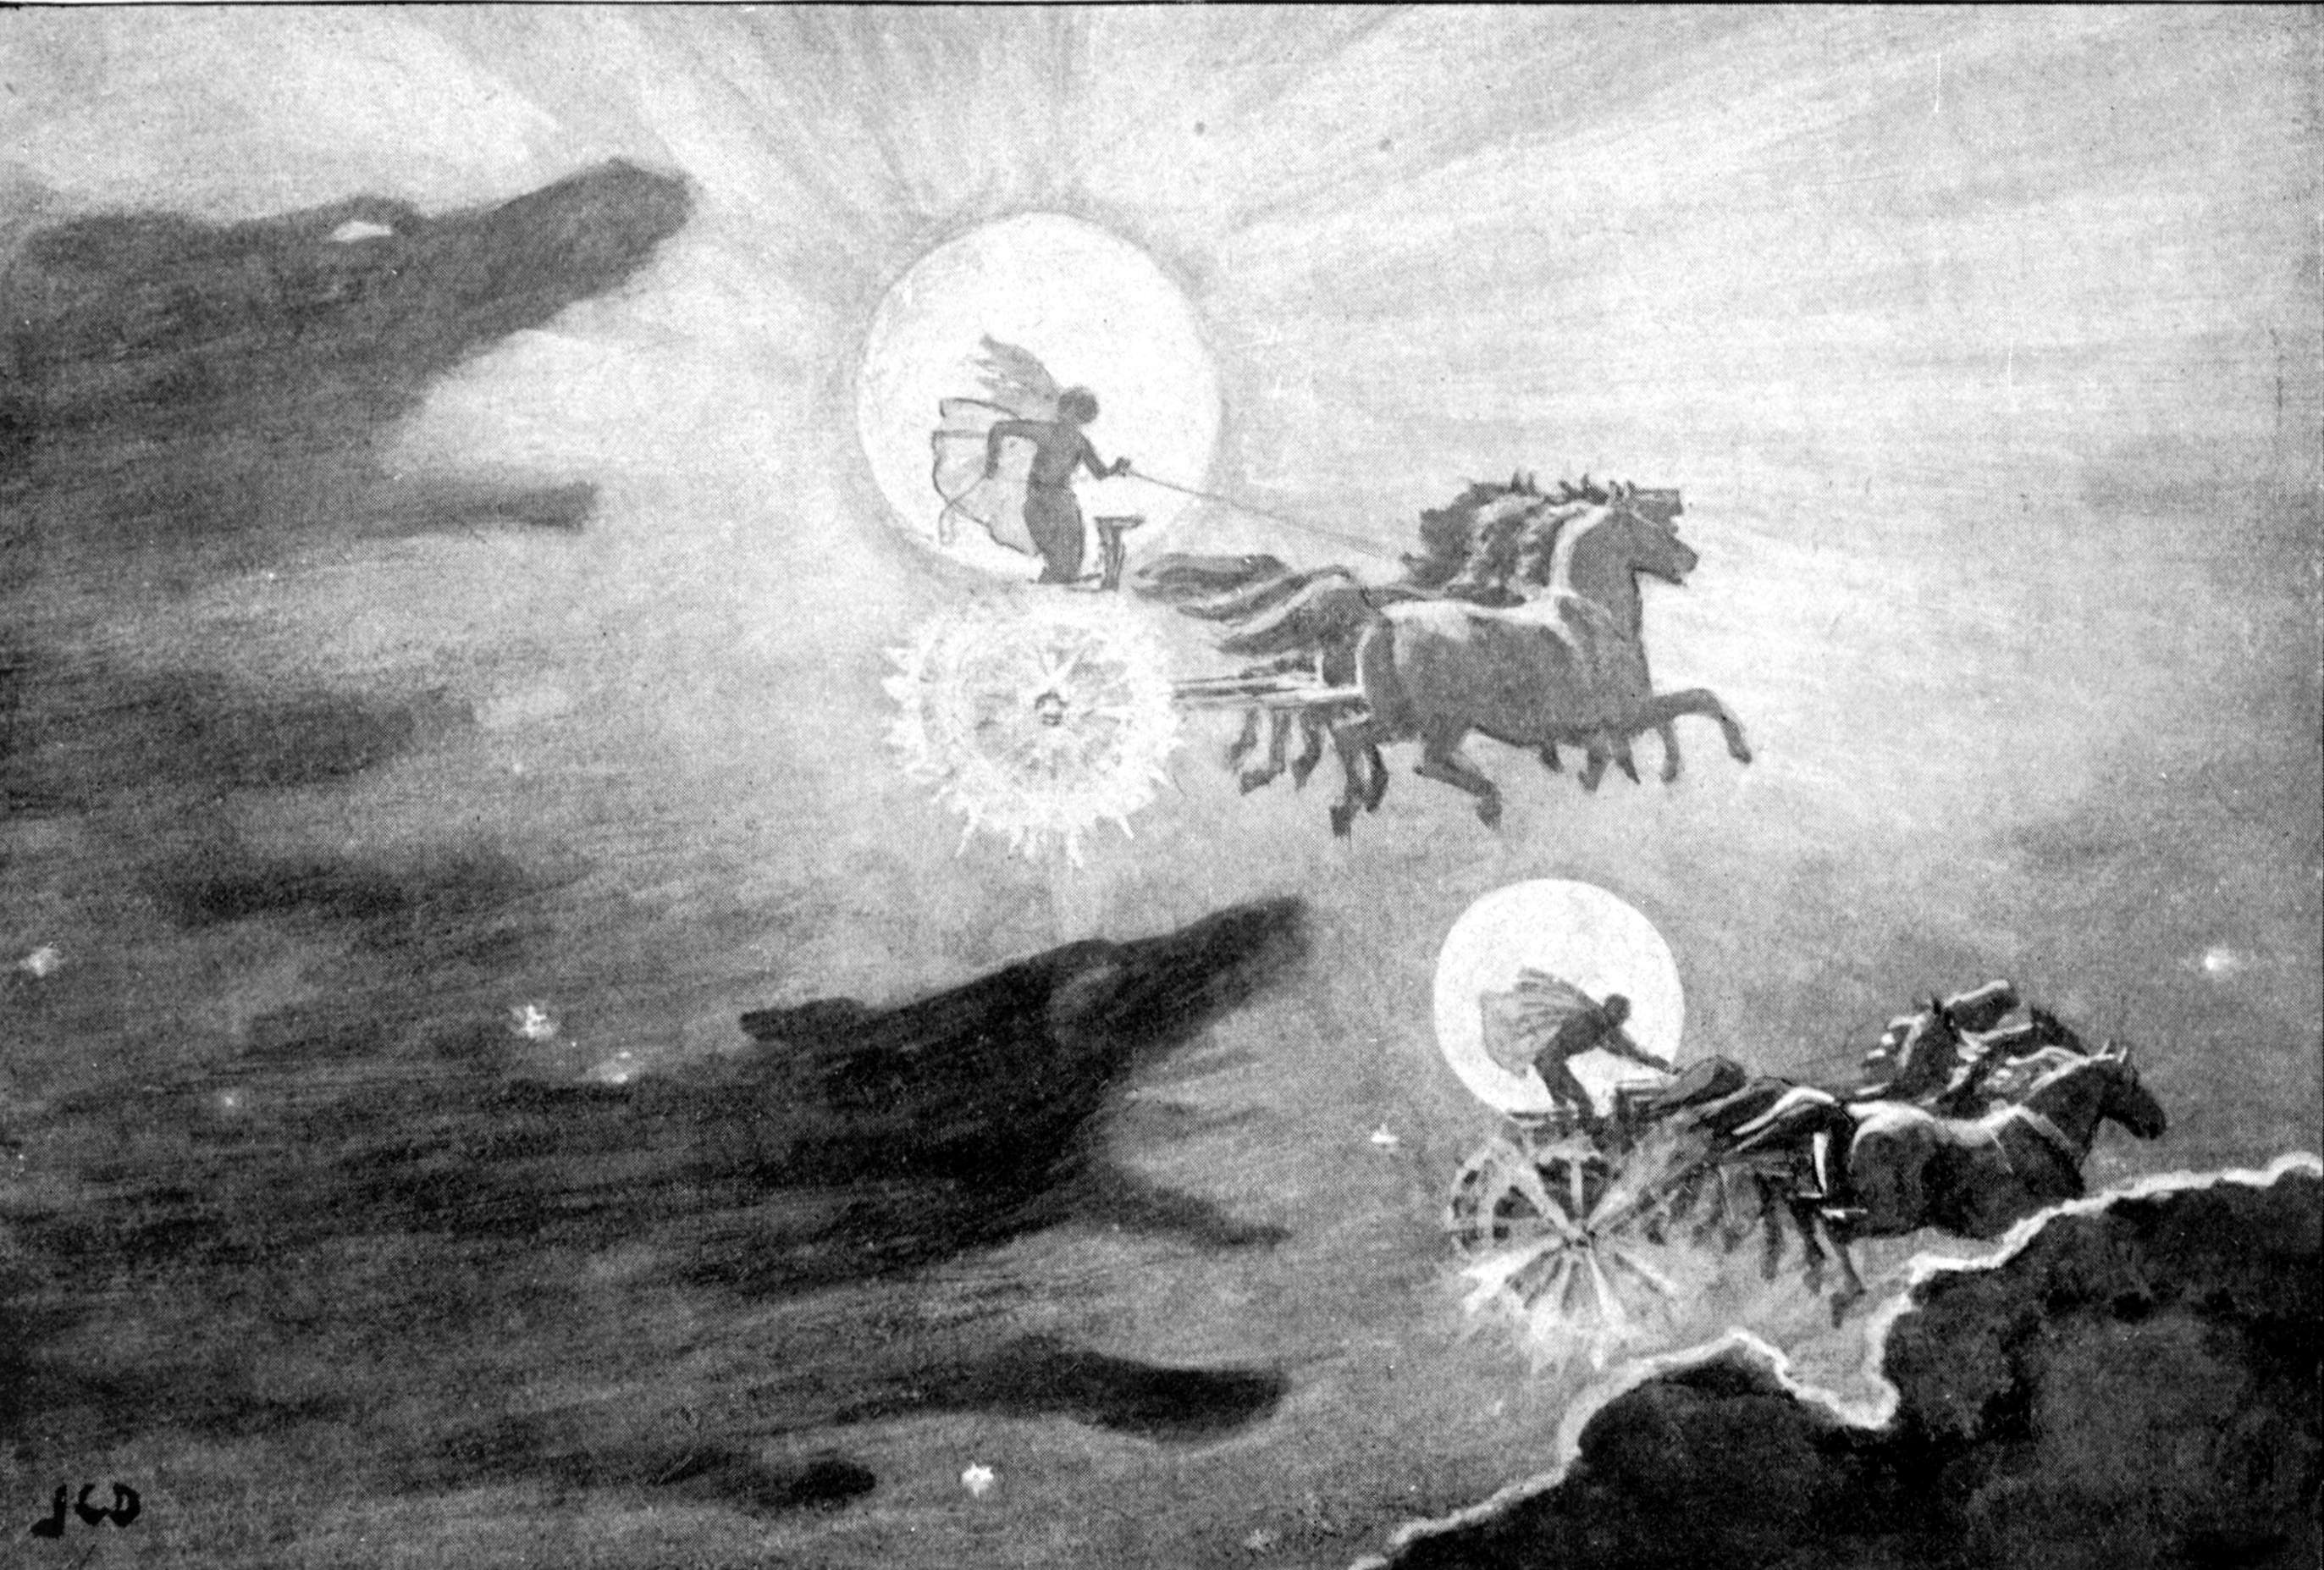 Viking creation - The Wolves Pursuing Sol and Mani by J. C. Dollman